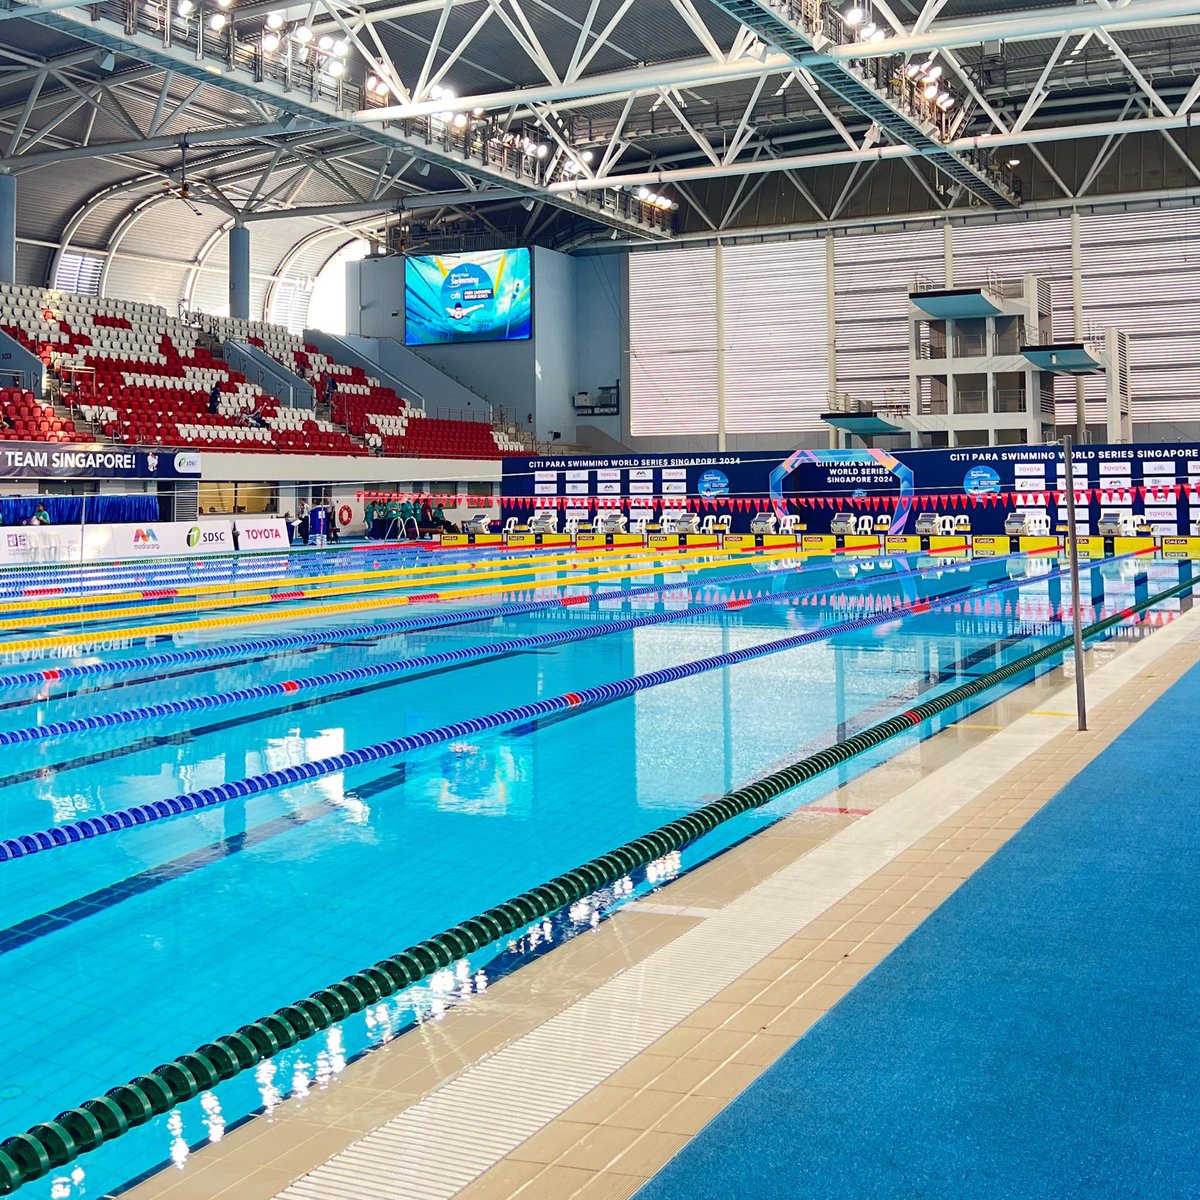 HERE WE ARE AGAIN! 🏊🏼‍♂️🏊🏼‍♀️ The Day 2 of races at the @Citi #ParaSwimming World Series Singapore 2024 is about to begin. 🗓️ 6 events are scheduled for this heats session: 📌 400m freestyle (M/W) 📌 50m & 100m breaststroke (M/W) 📺 Watch live: bit.ly/4dMdBoE #Paralympic